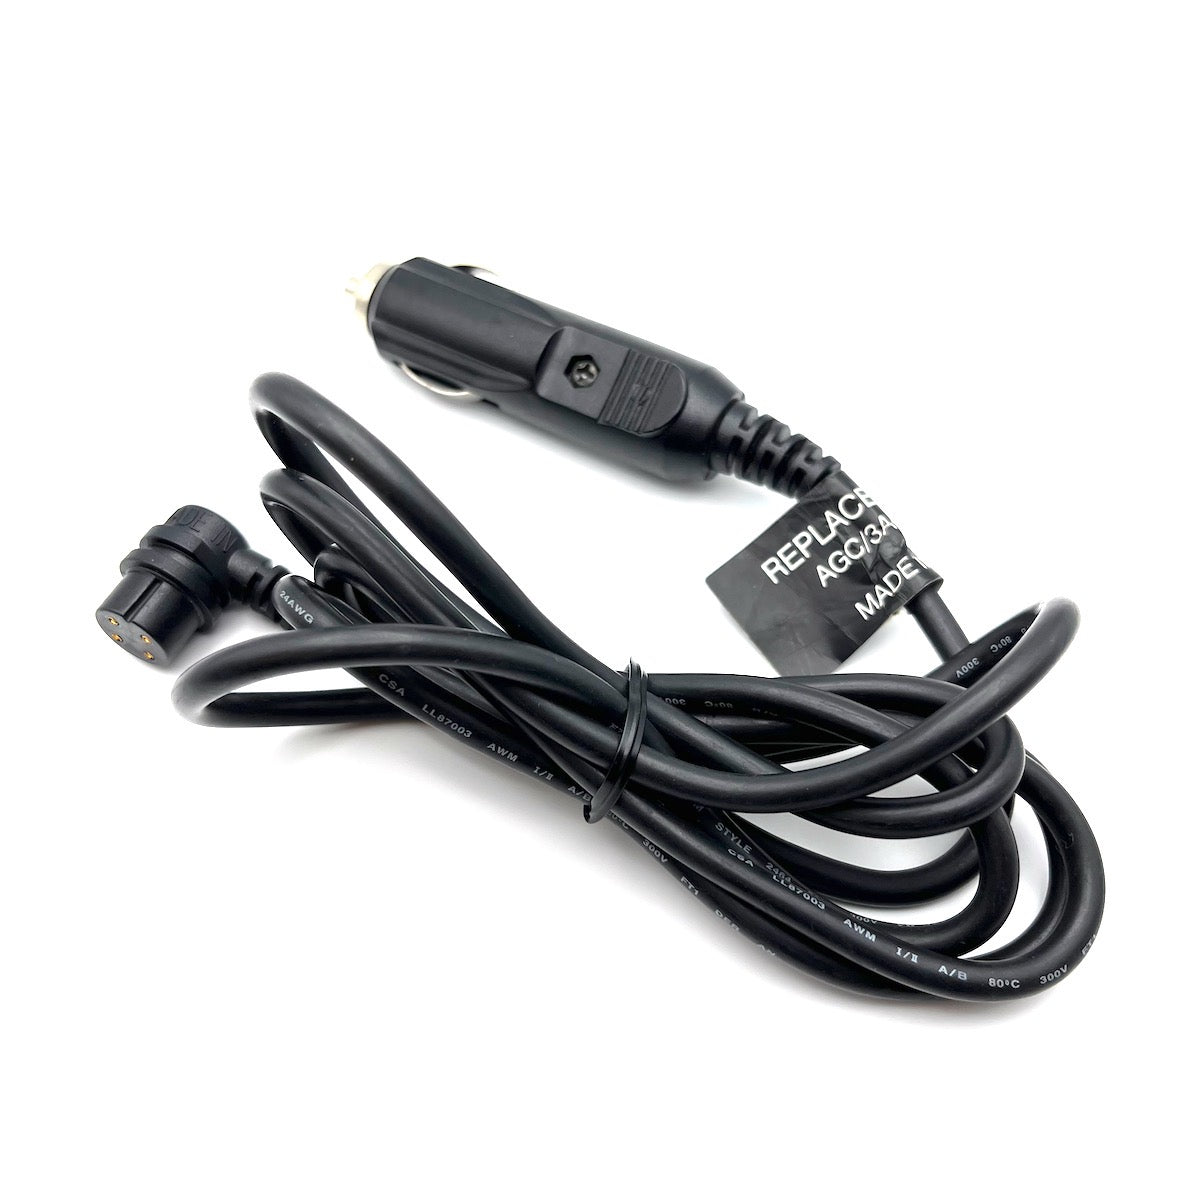 Vehicle Power Cable for Garmin GPSMAP 60, 76, 78, 176, 176C, 196, 295 used